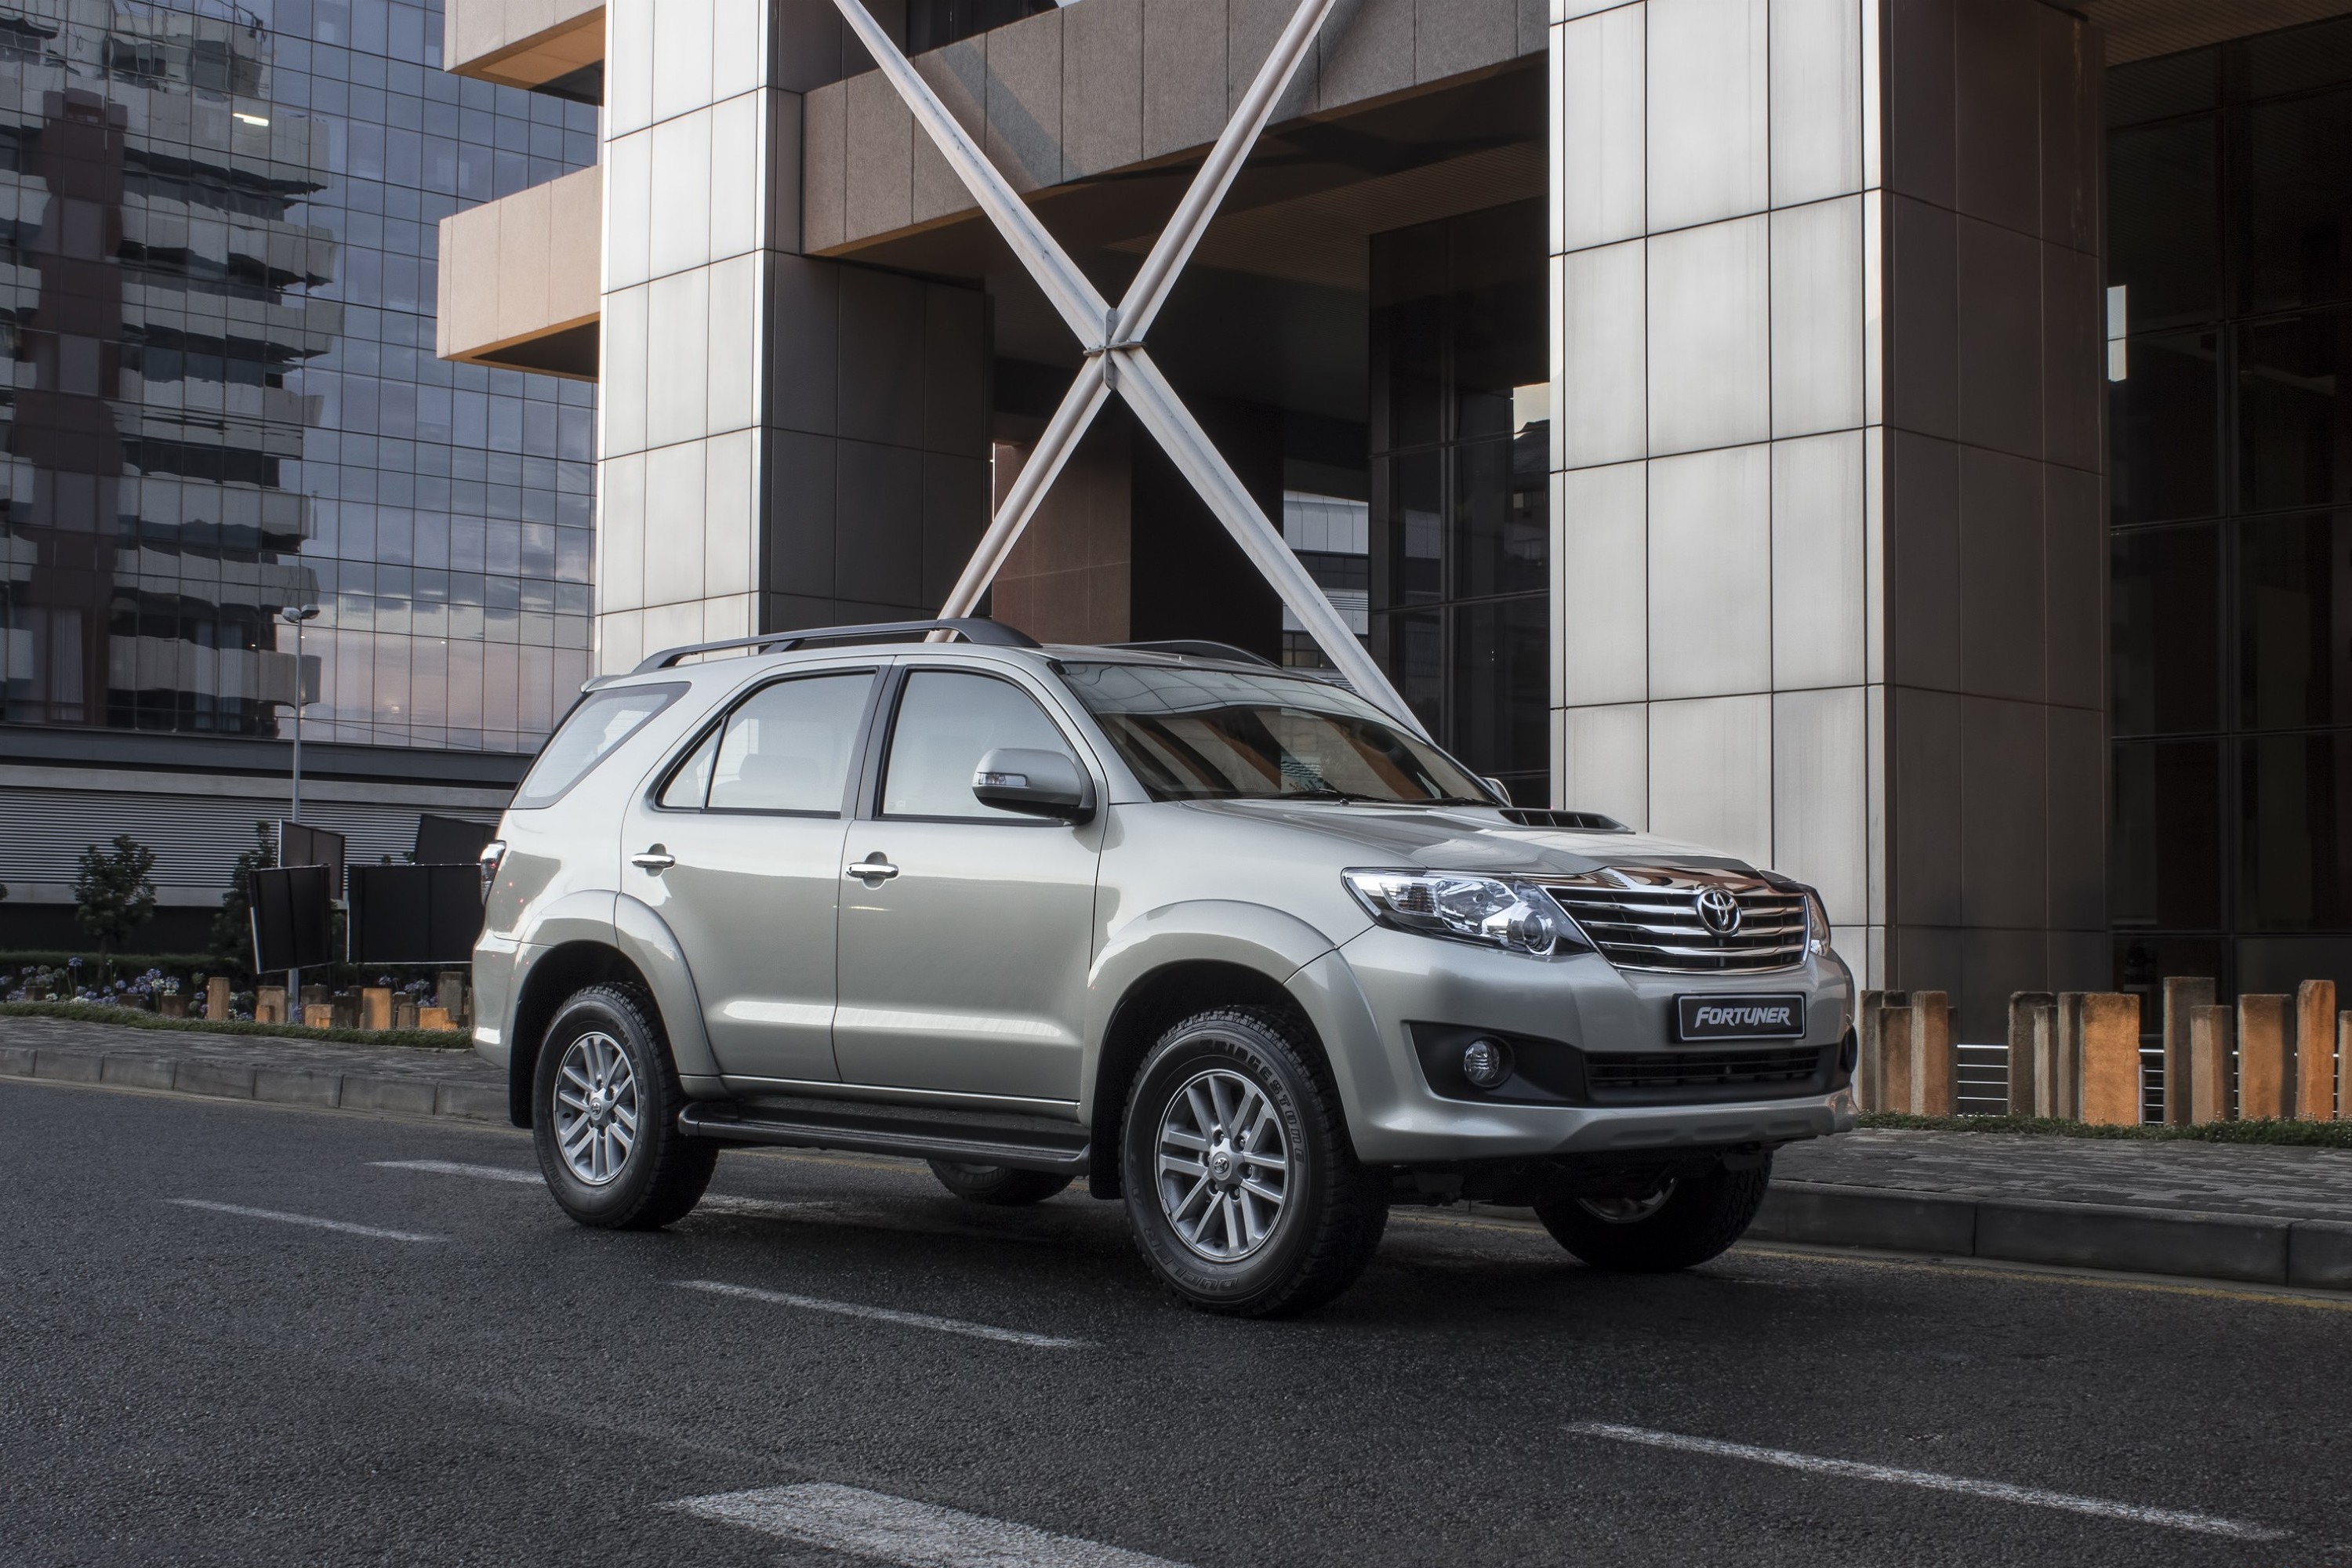 Toyota Fortuner Wallpapers